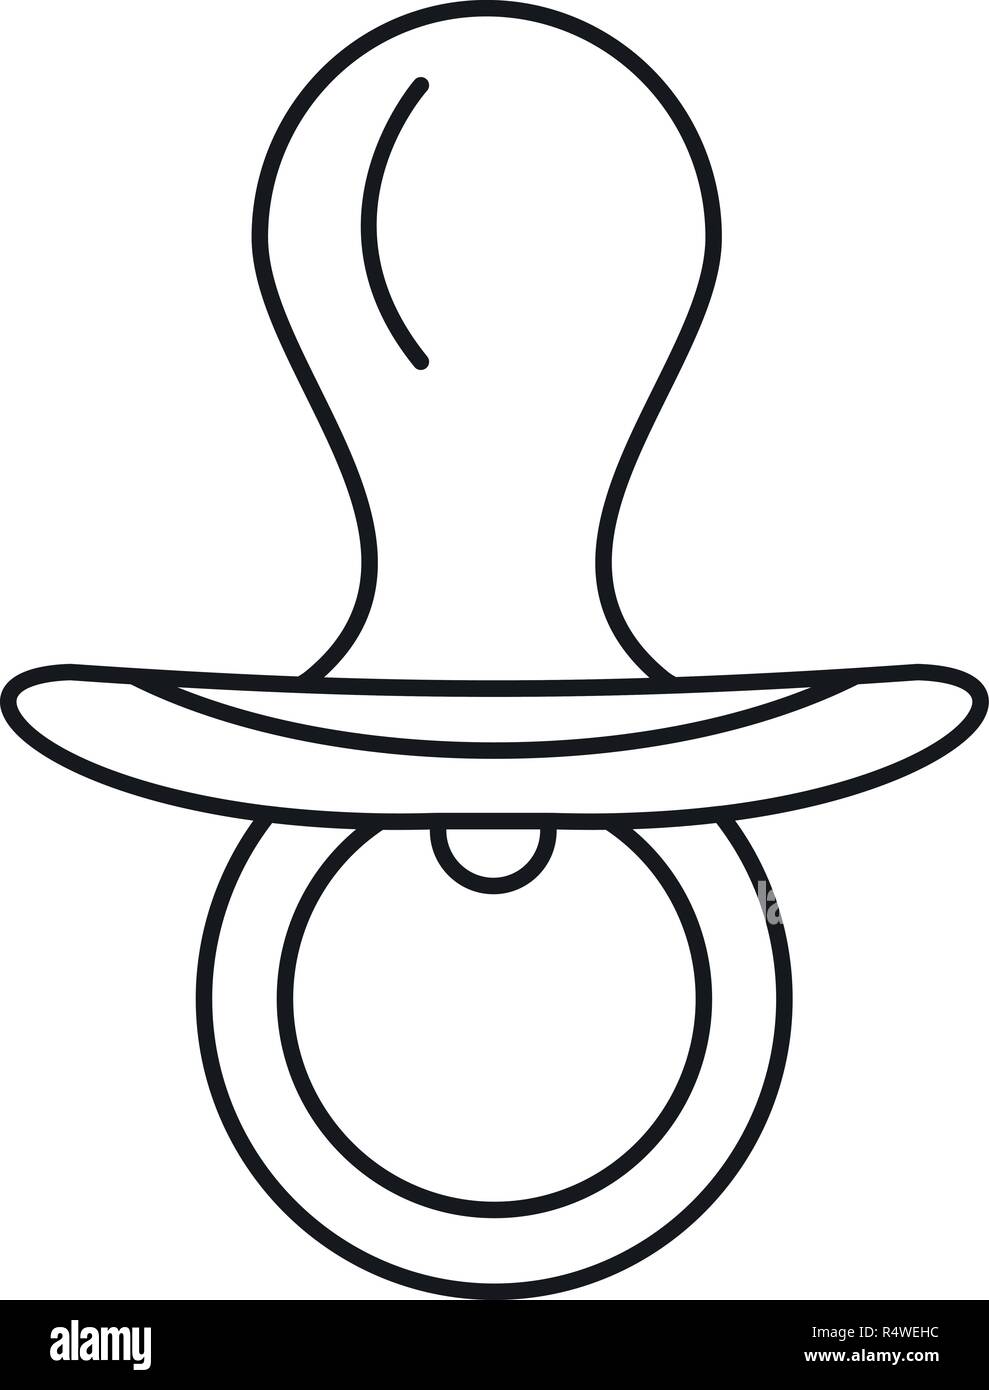 https://c8.alamy.com/comp/R4WEHC/silicone-nipple-icon-outline-silicone-nipple-vector-icon-for-web-design-isolated-on-white-background-R4WEHC.jpg